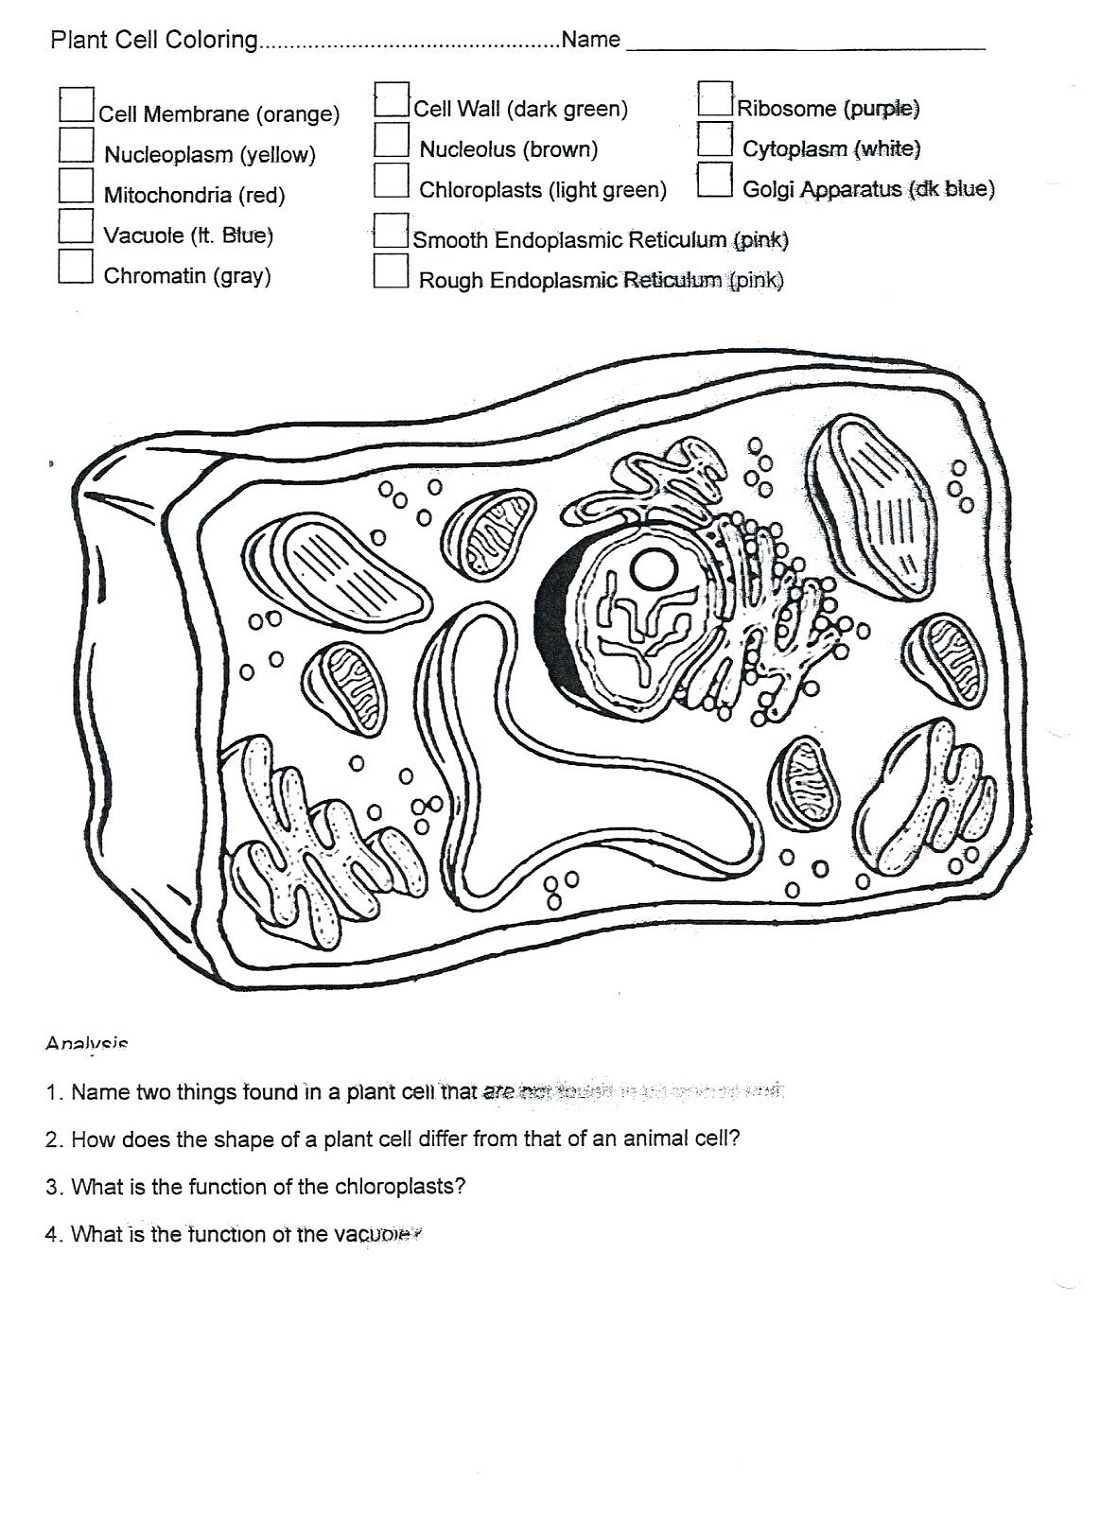 Plant Cell Coloring Key Blank